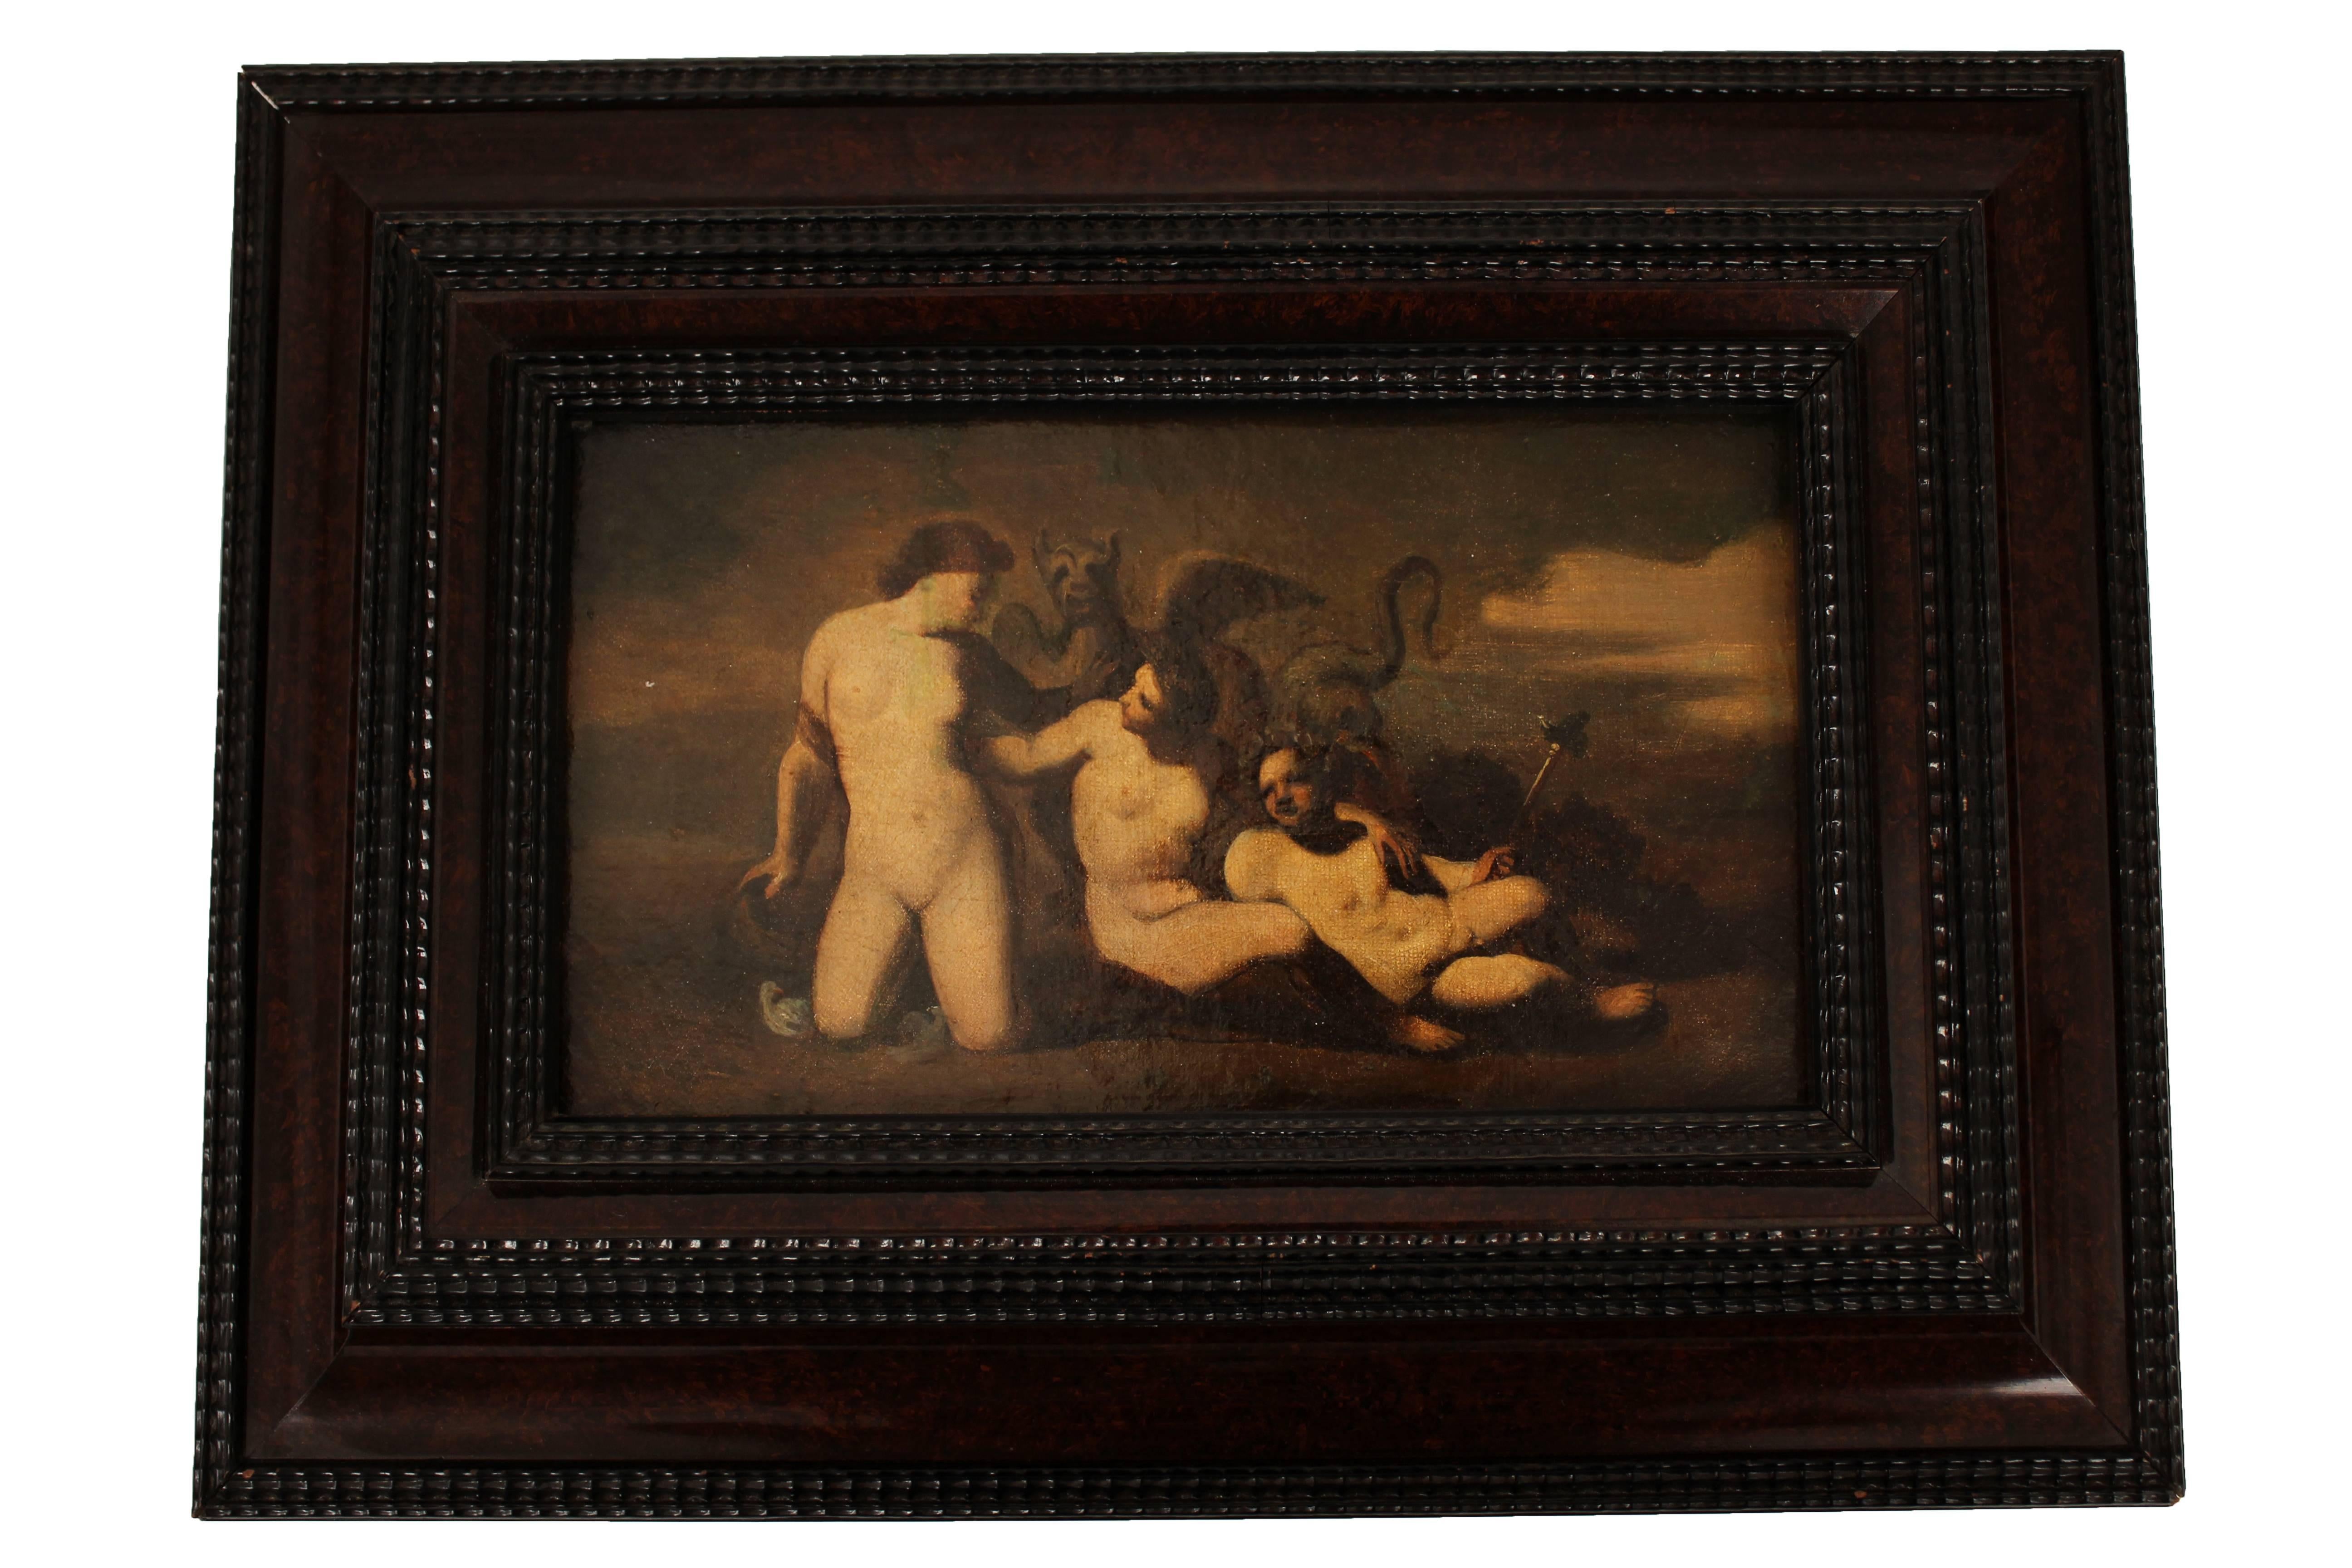 The Erynies: Alecto, Tisiphone, Megaera
by Pierre-Paul Prud’hon (French, 1758-1823)
oil on canvas
France, late 18th century
Measures: H 10.75; W 6 in,  

The Erynies are the three Furies of Roman and Greek mythology; female spirits of Justice